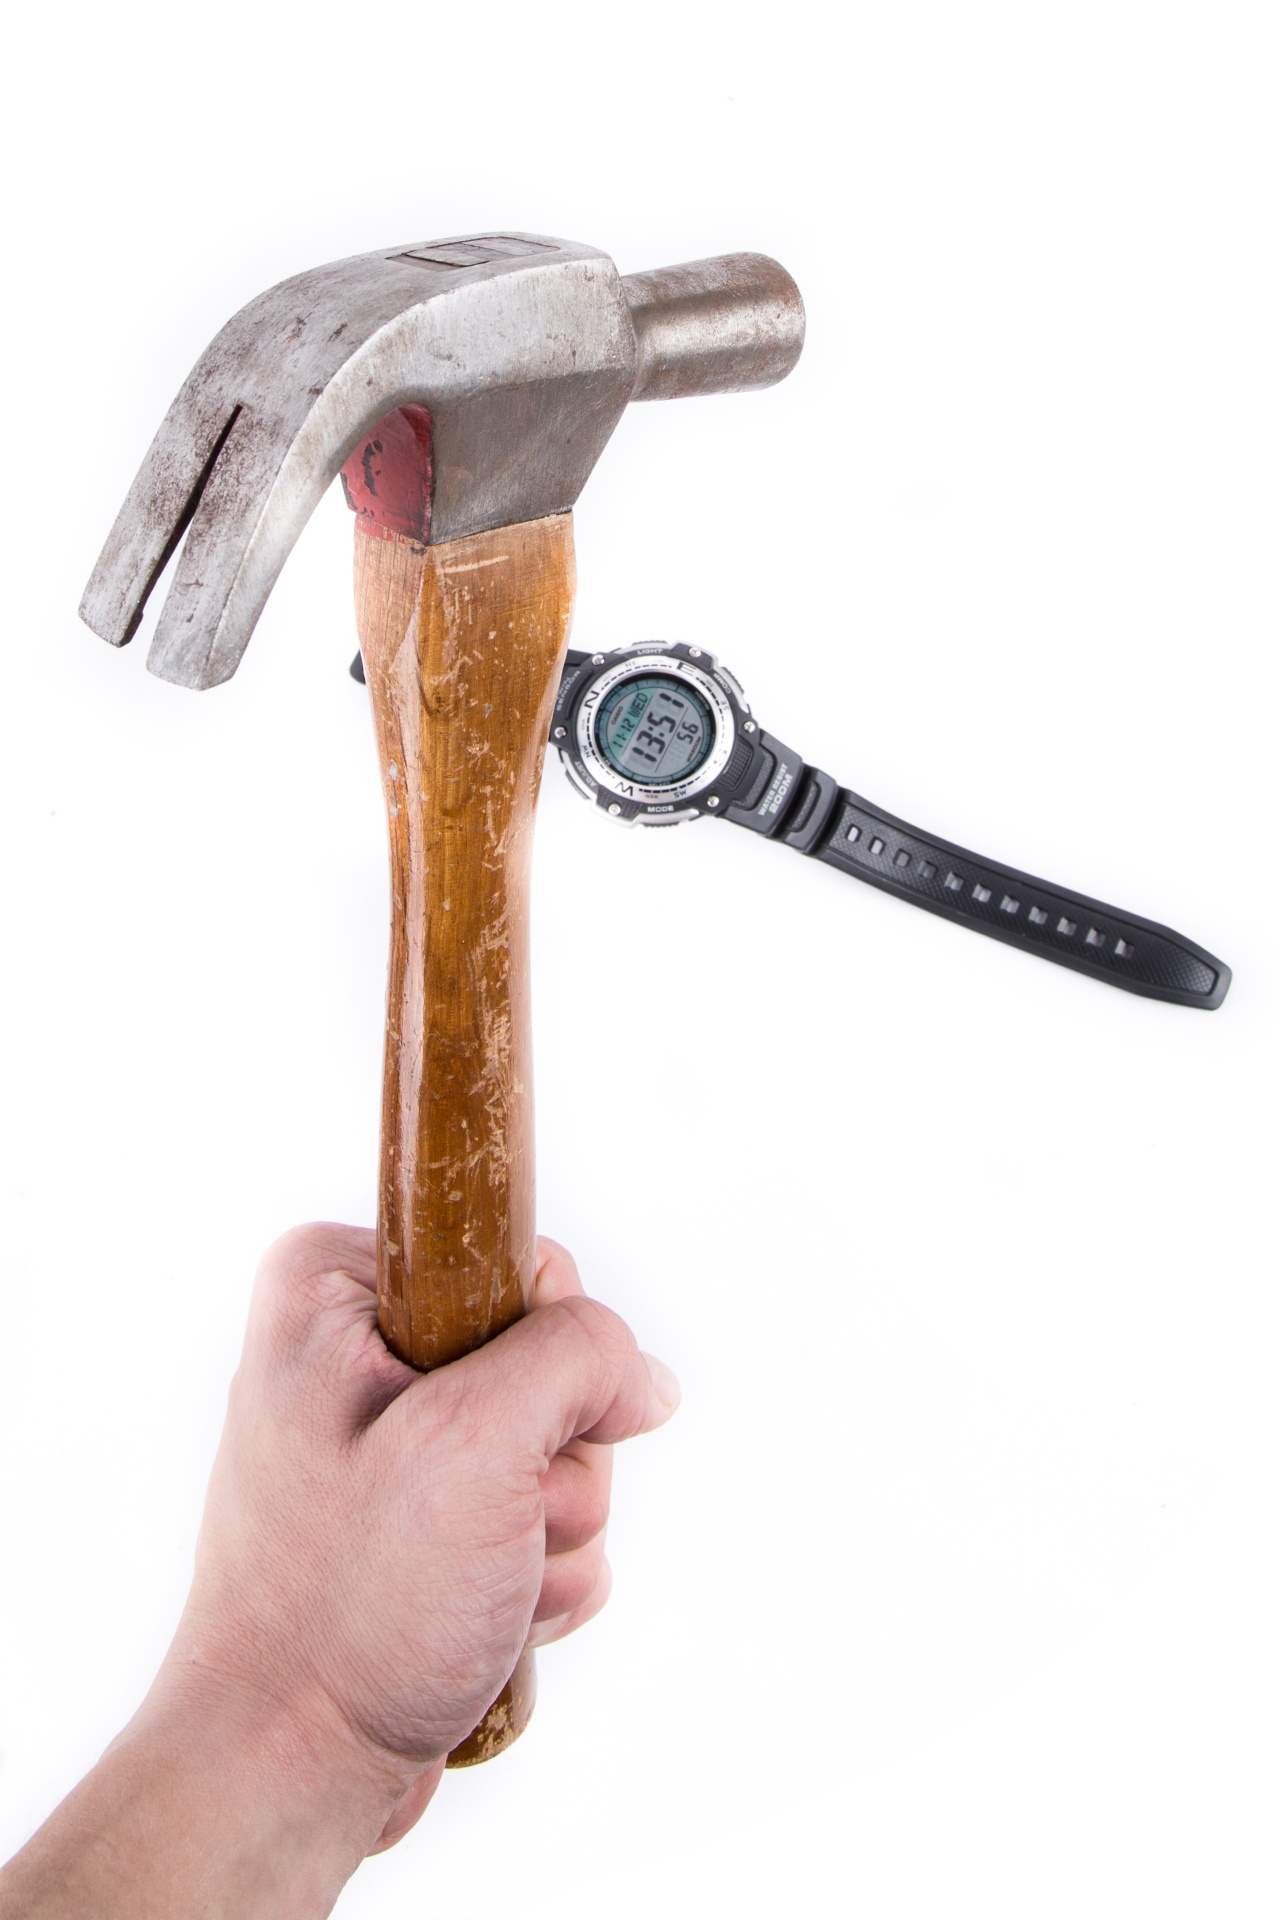 Watch Smashed With A Hammer Isolated On The White Background